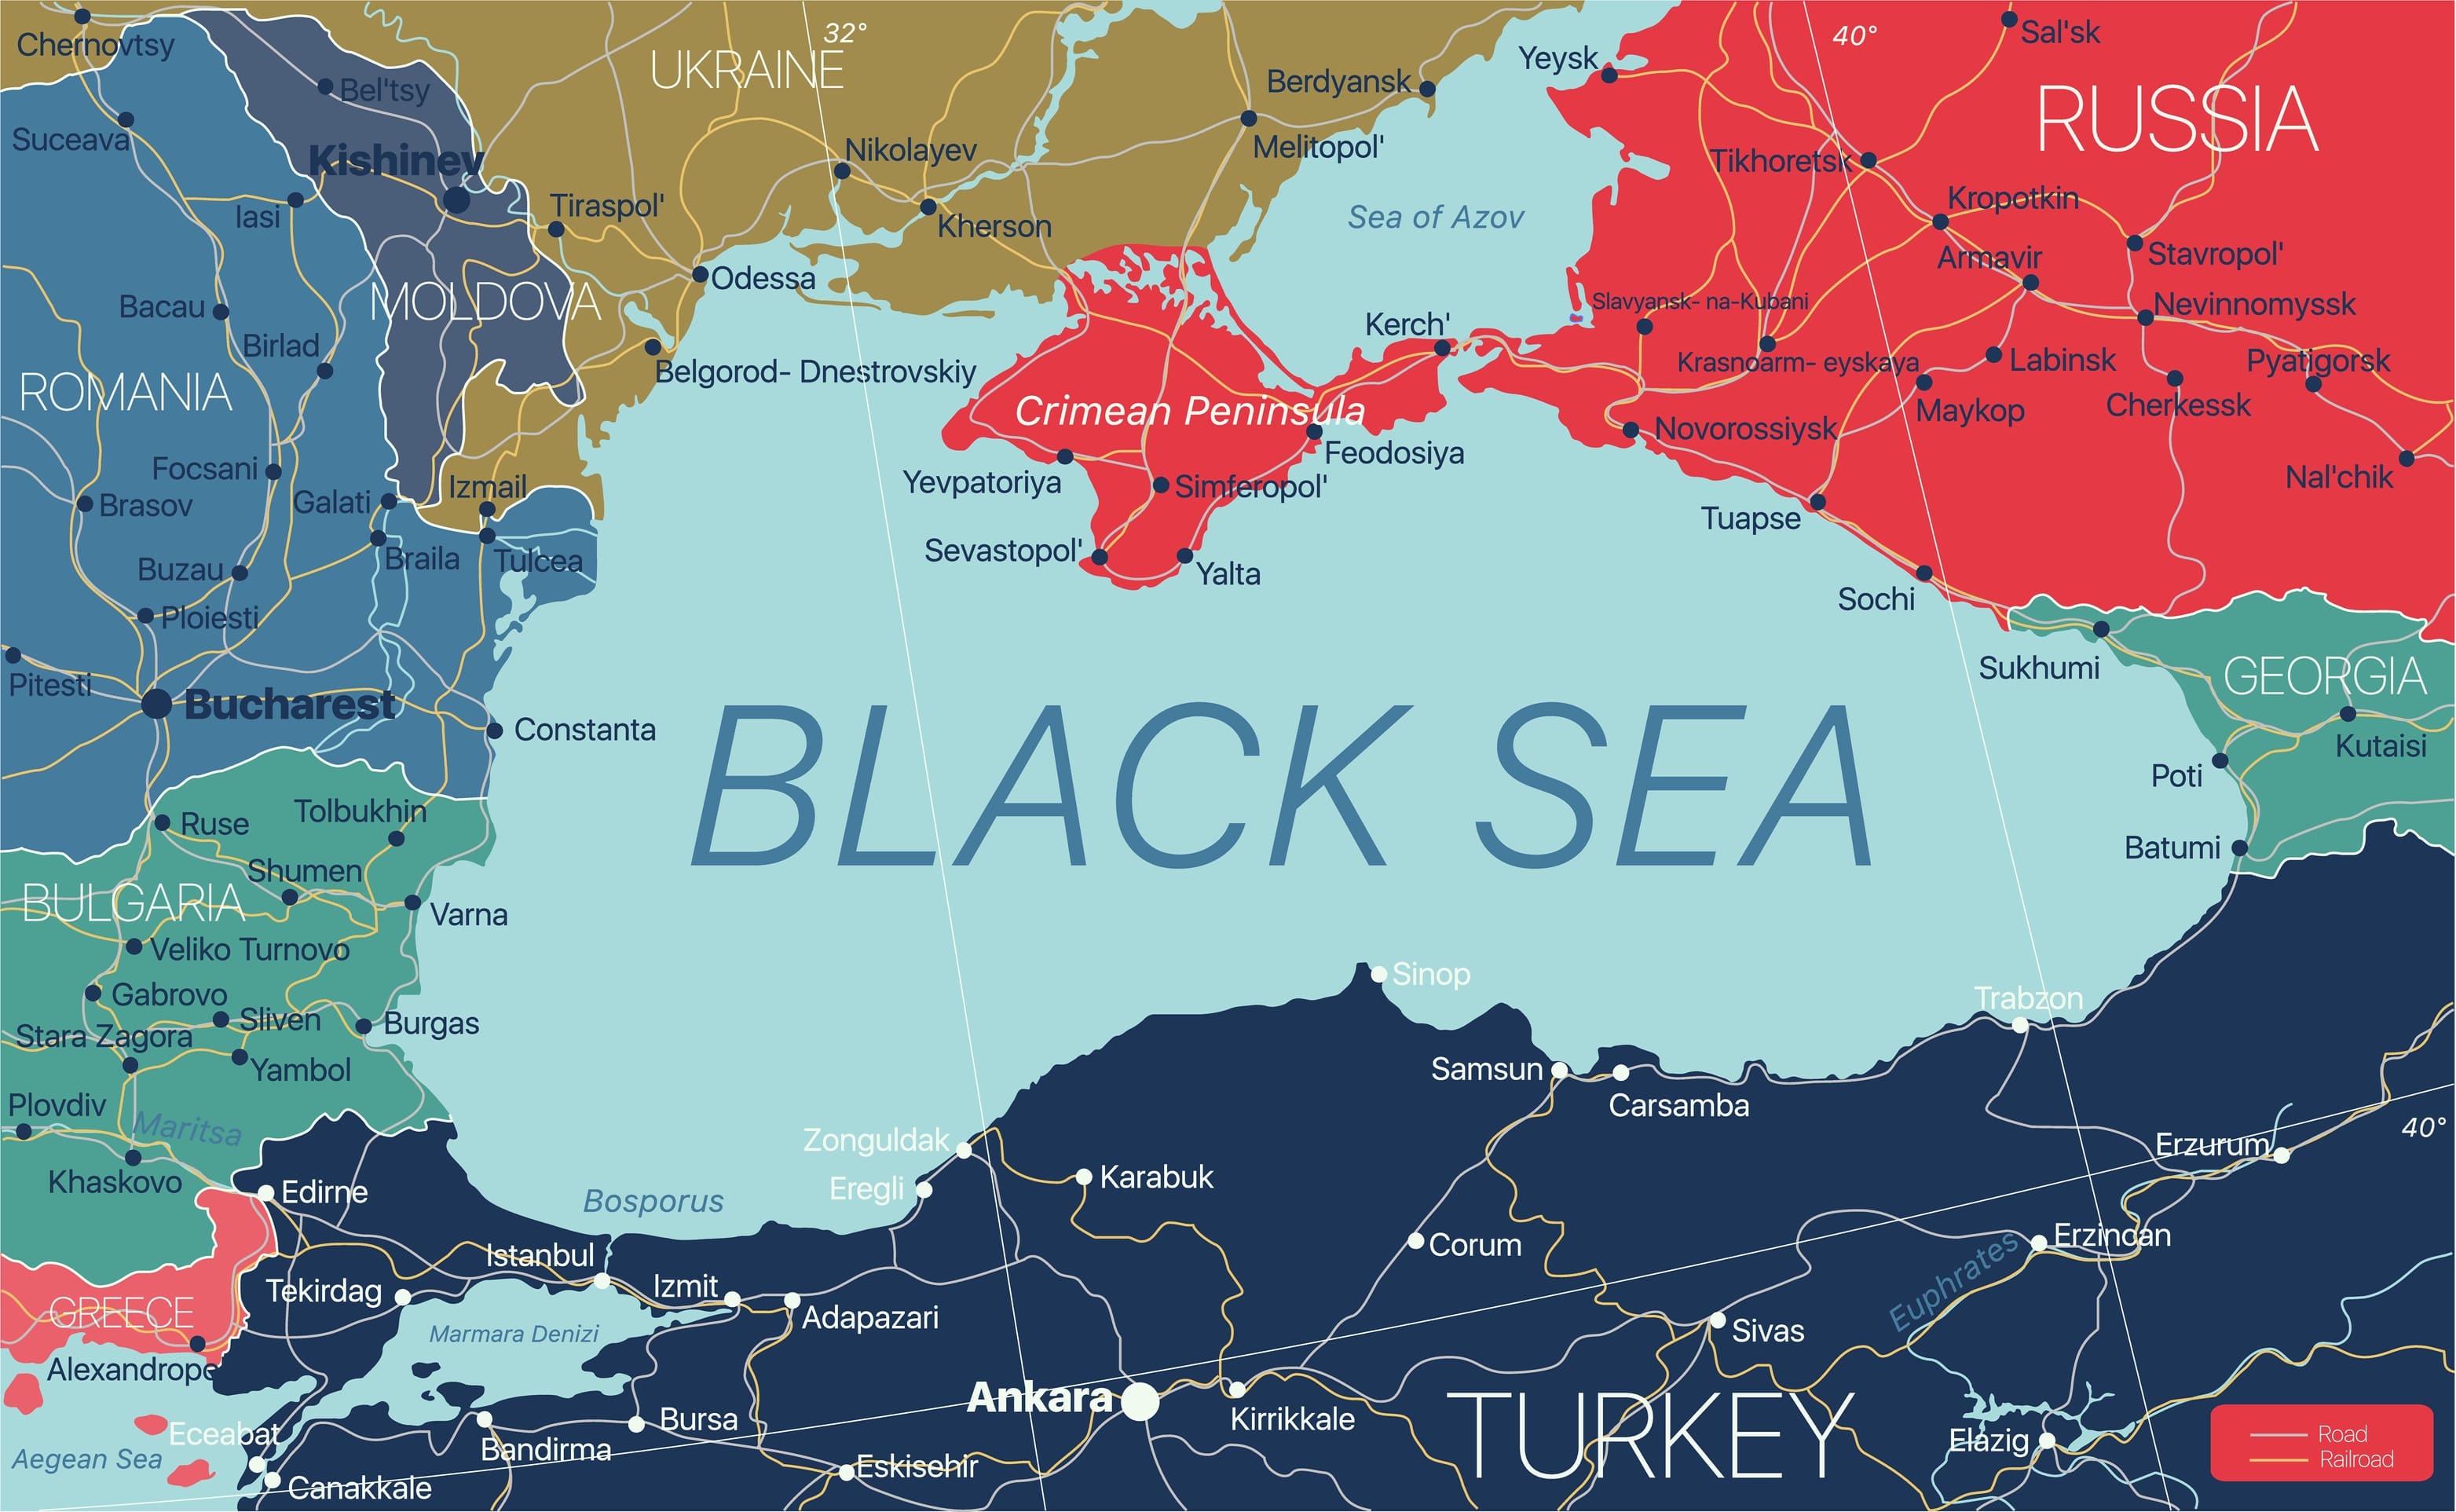 Black Sea region detailed editable map with regions cities and towns, roads and railways, geographic sites